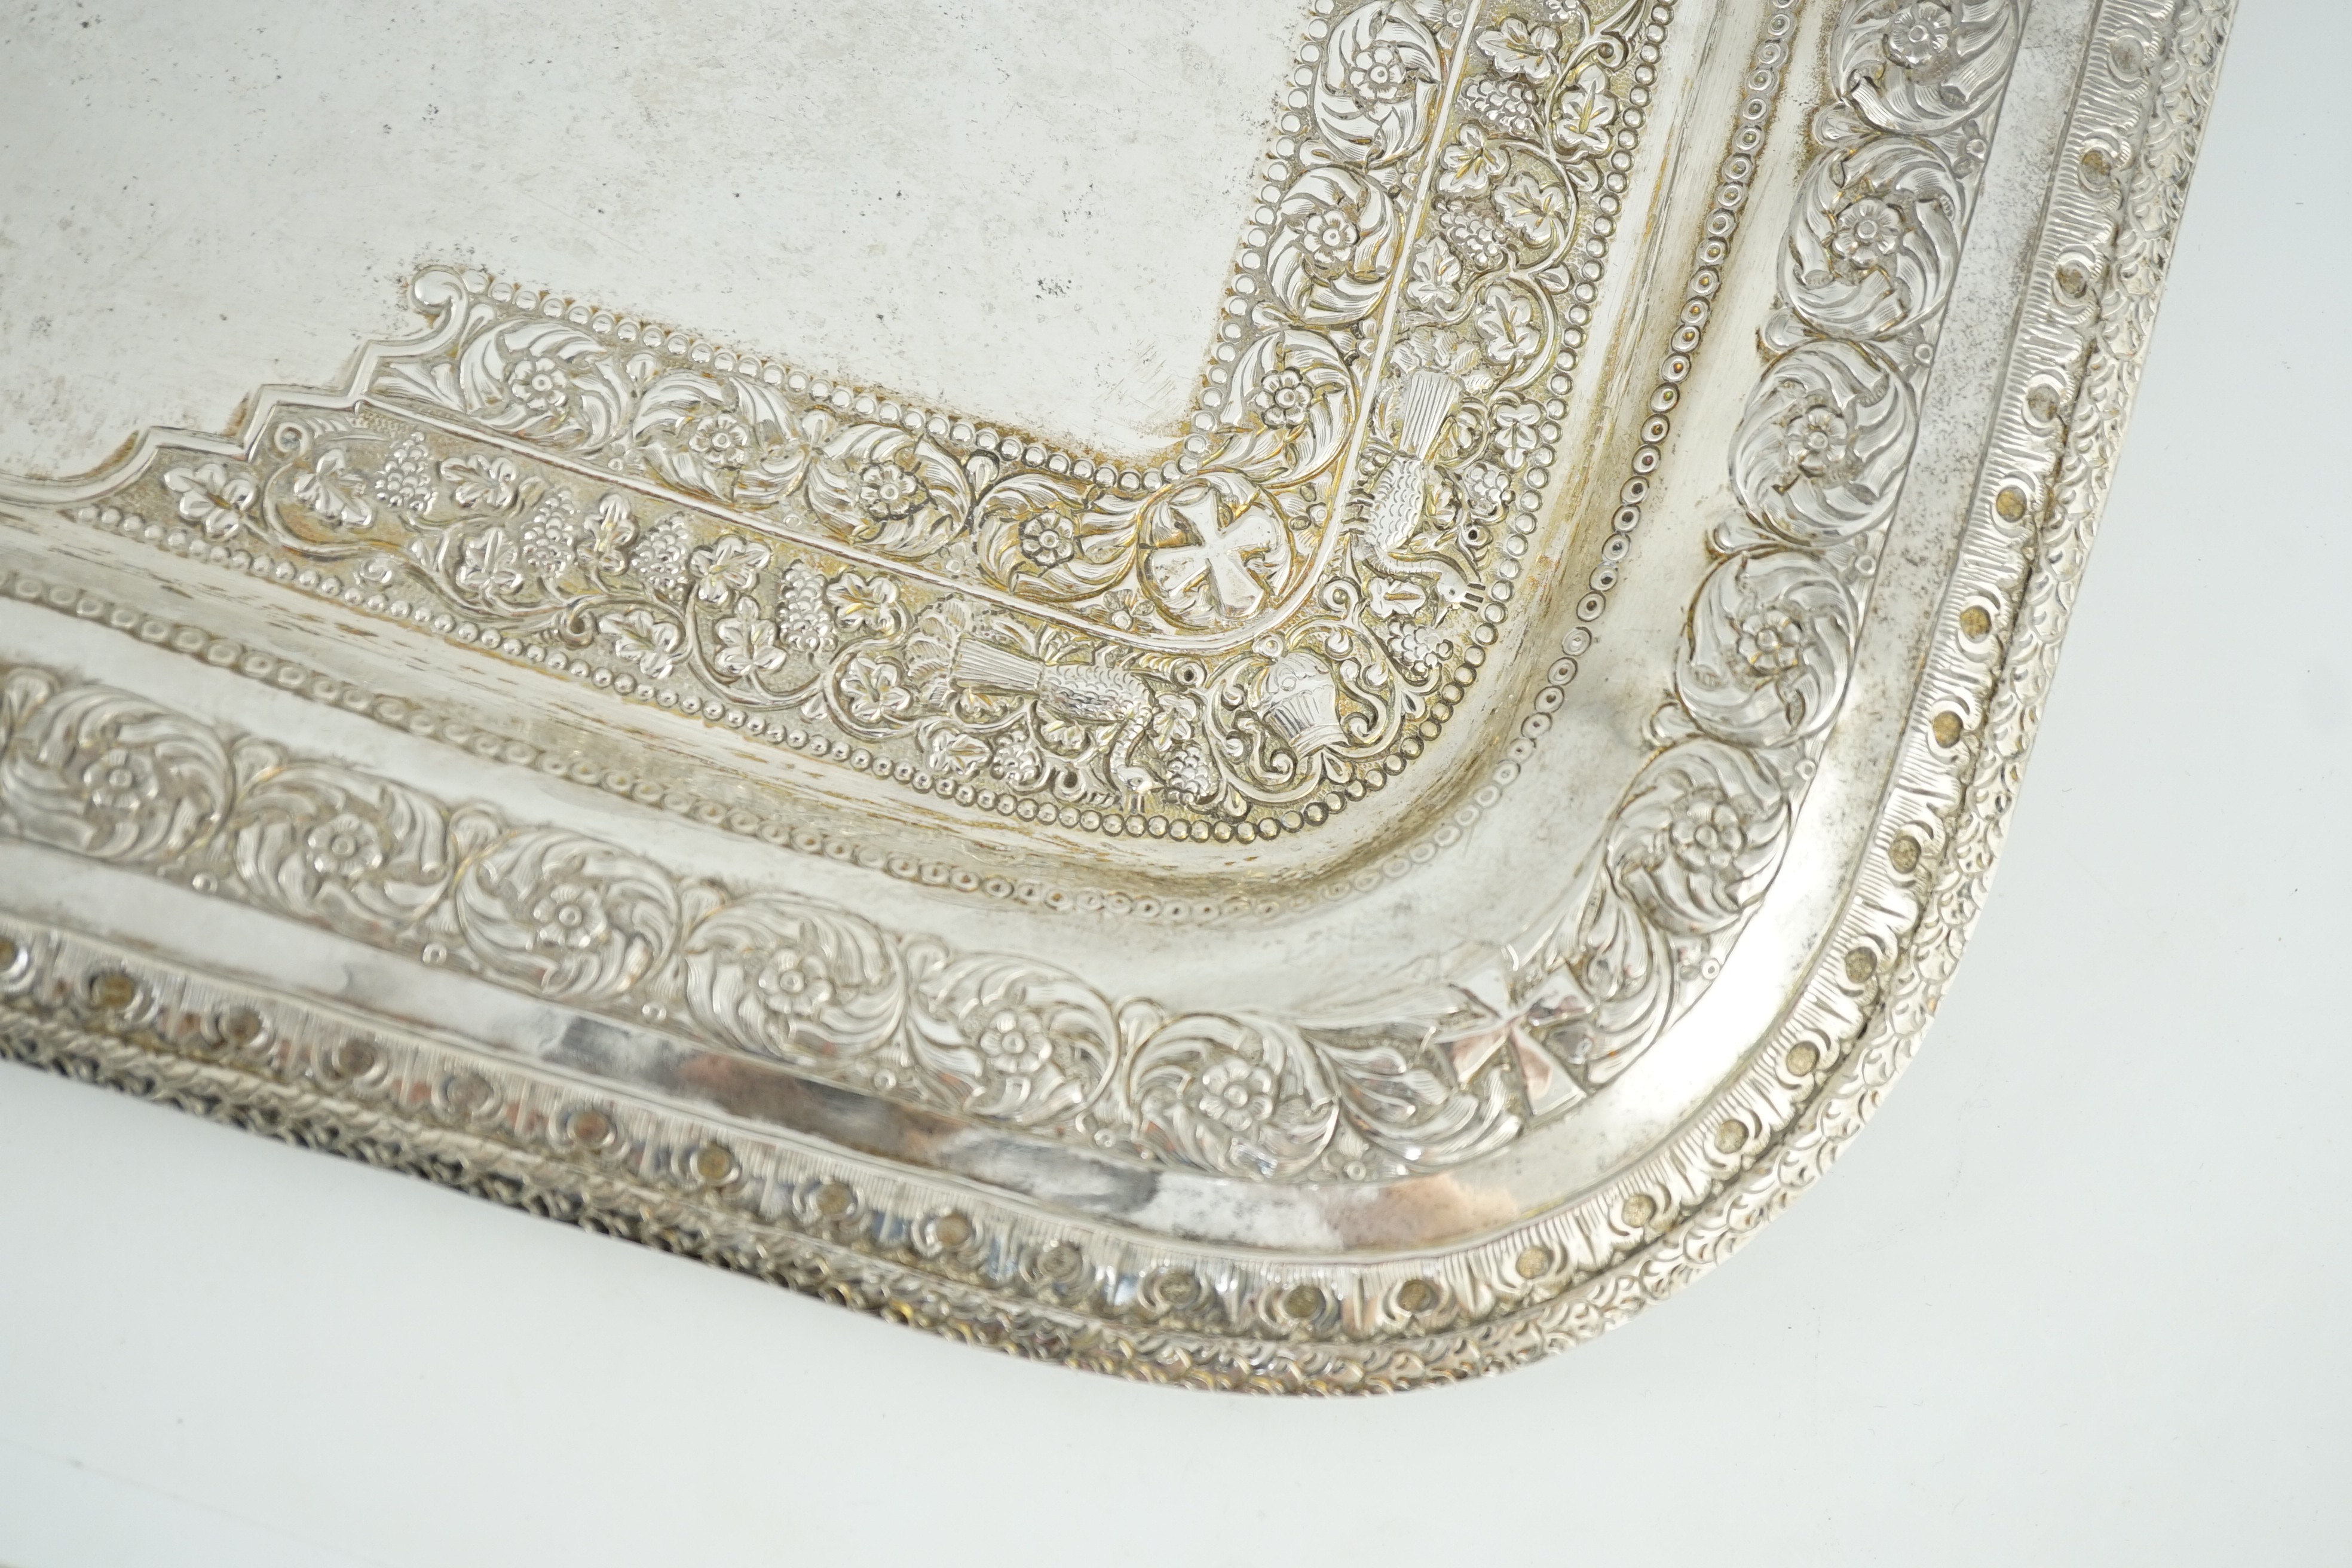 A 20th century Indian white metal rounded rectangular tea tray